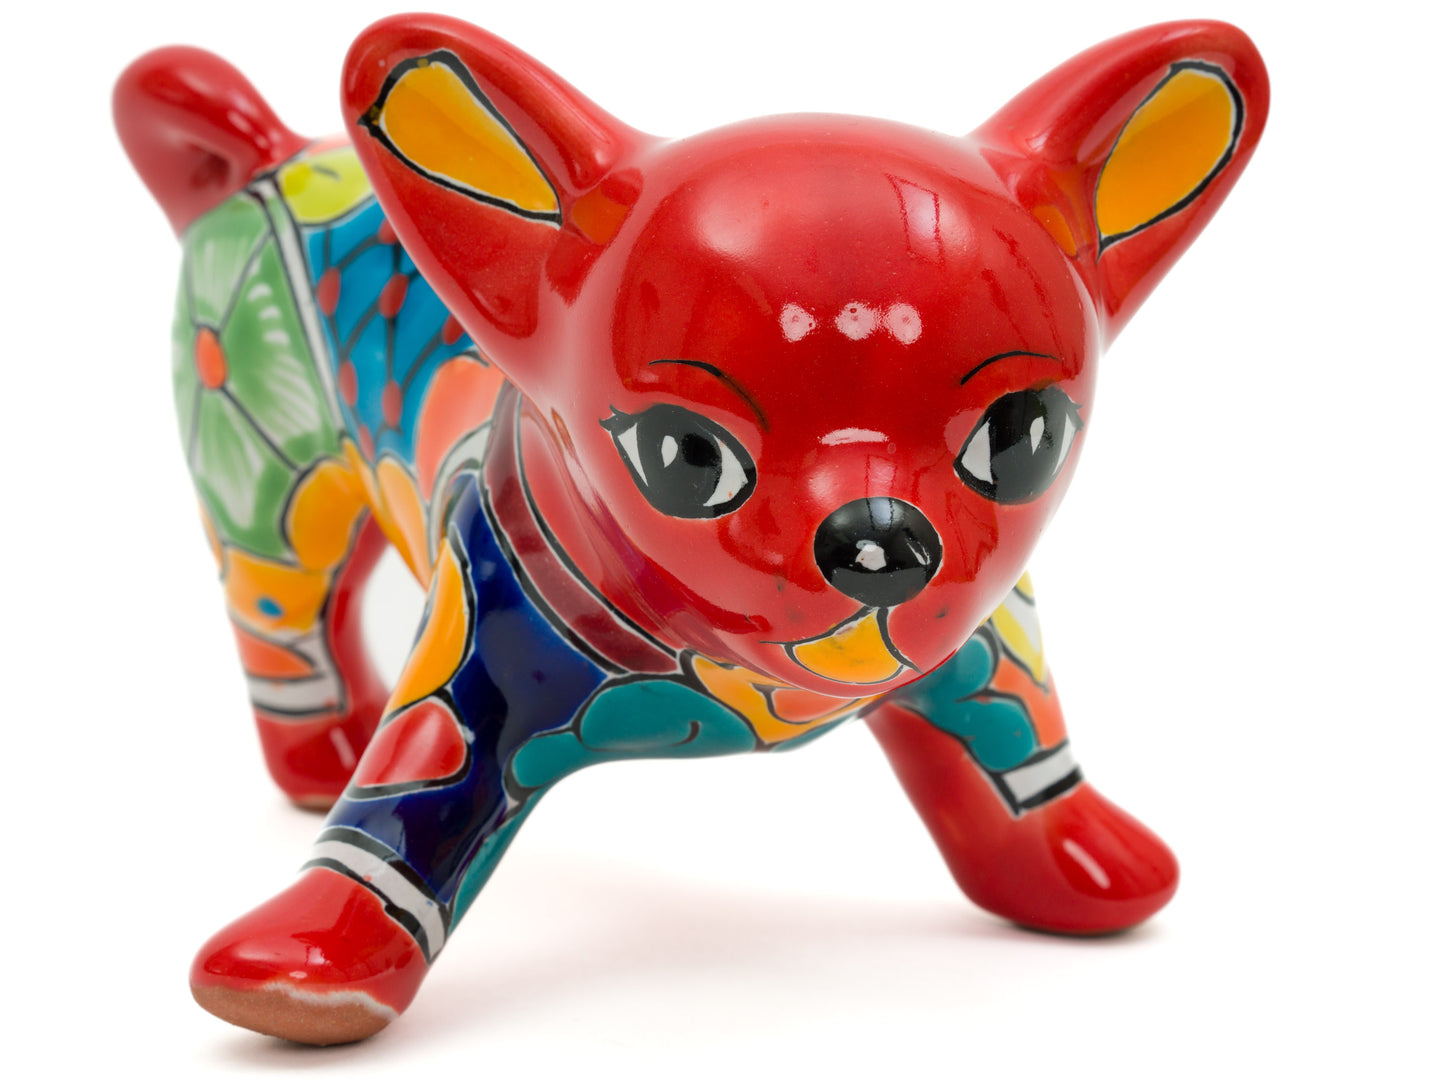 Peeing Chihuahua Puppy Statue - Red